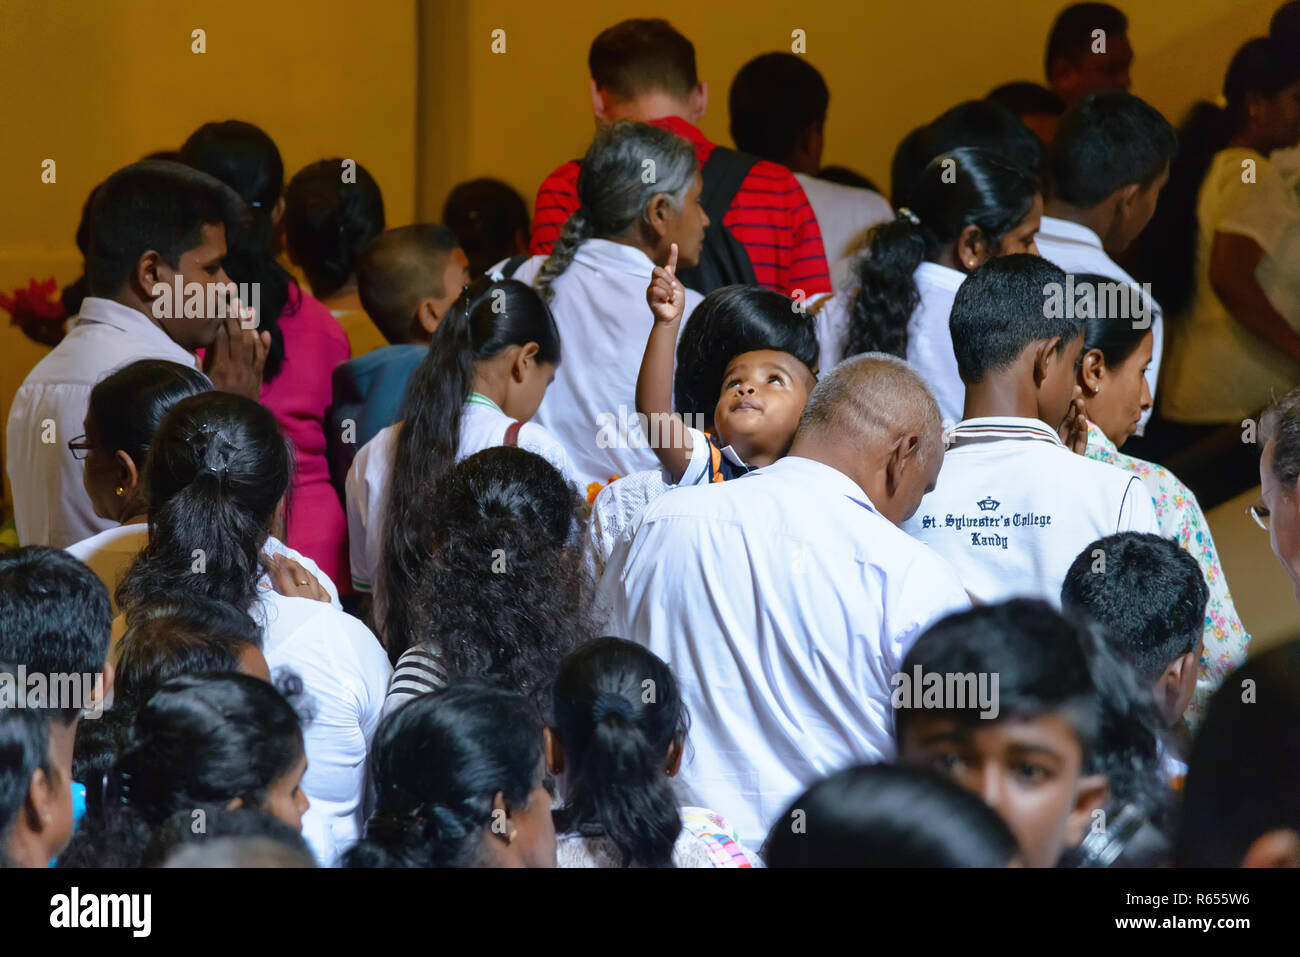 Kandy, Sri Lanka - August 18, 2017: The queue line of pilgrims for acces to the sacred tooth relic of the Buddha in Sri Dalada Maligawa temple Stock Photo